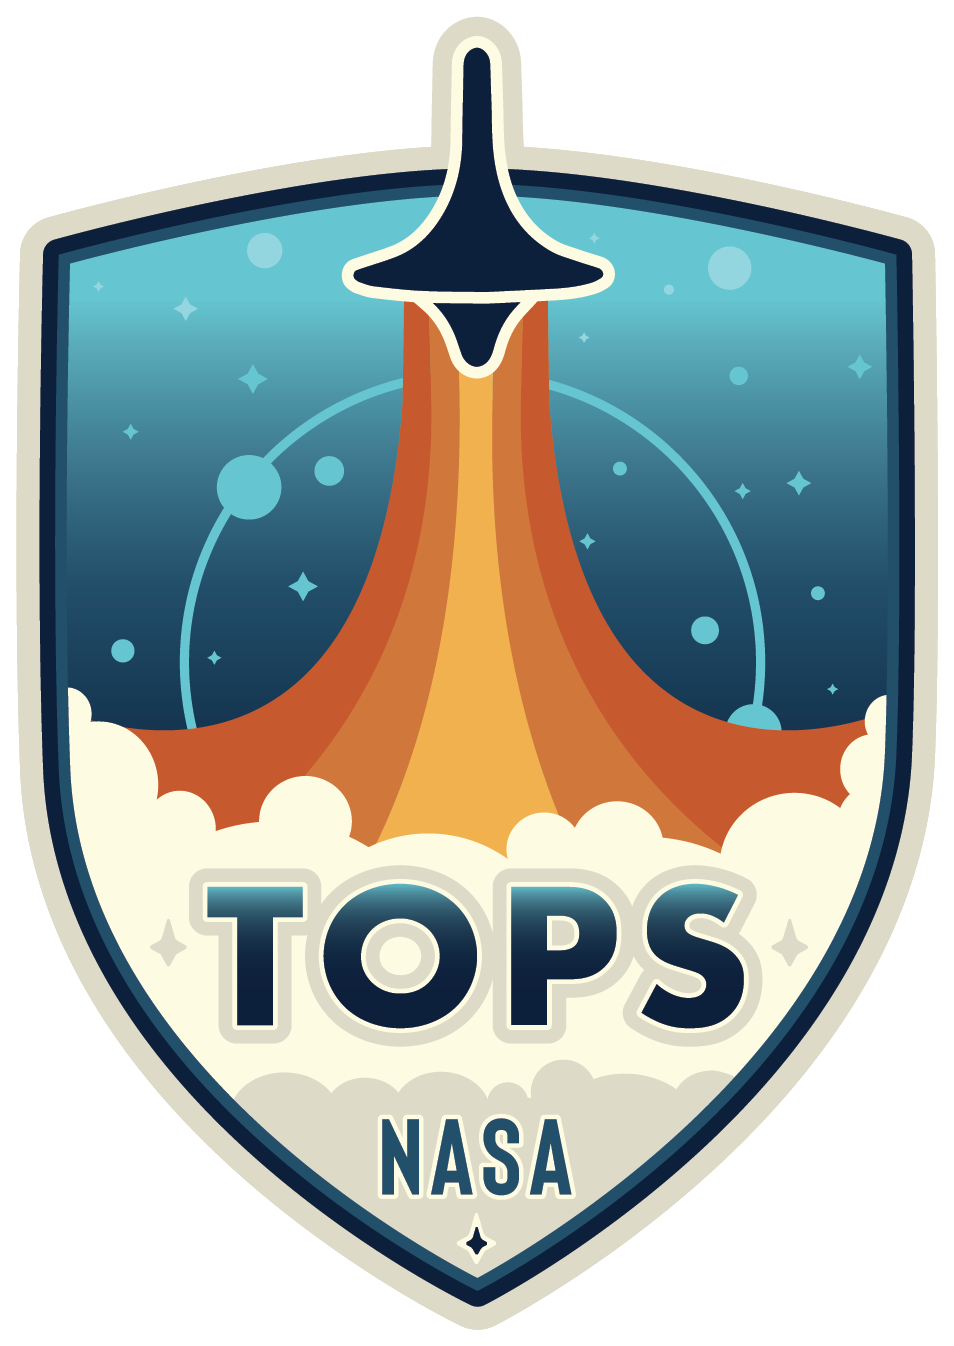 Transform to Open Science Logo that shows a top as a rocket taking off and the text Transform to Open Science in the white vapor plume around the launch site